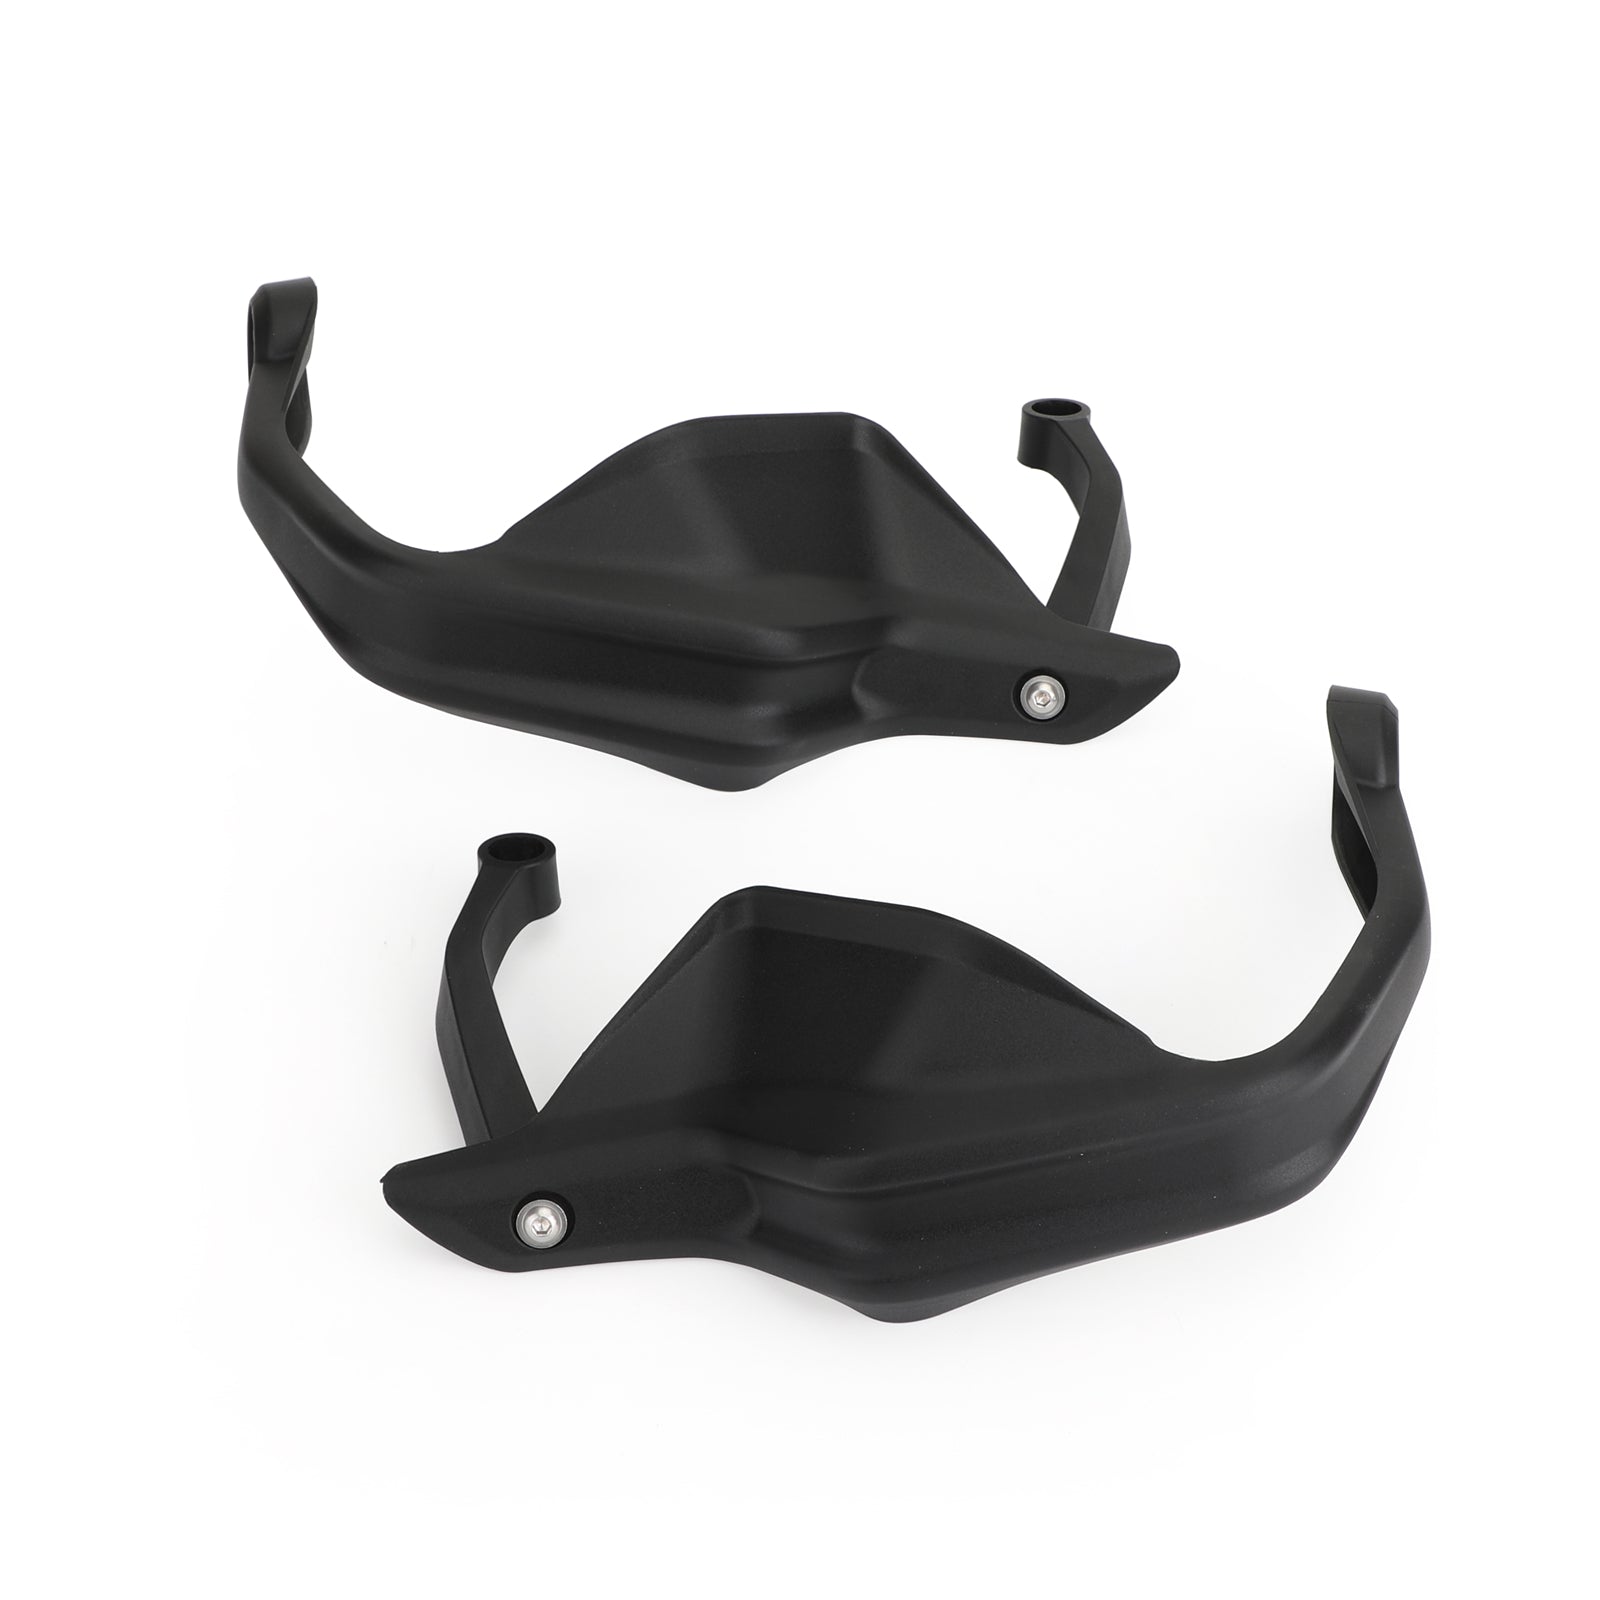 Handguard For BMW G310GS/G310R 2017-2019 Motorcycle Protector Hand Guards fits for BMW G310GS/G310R 2017-2019